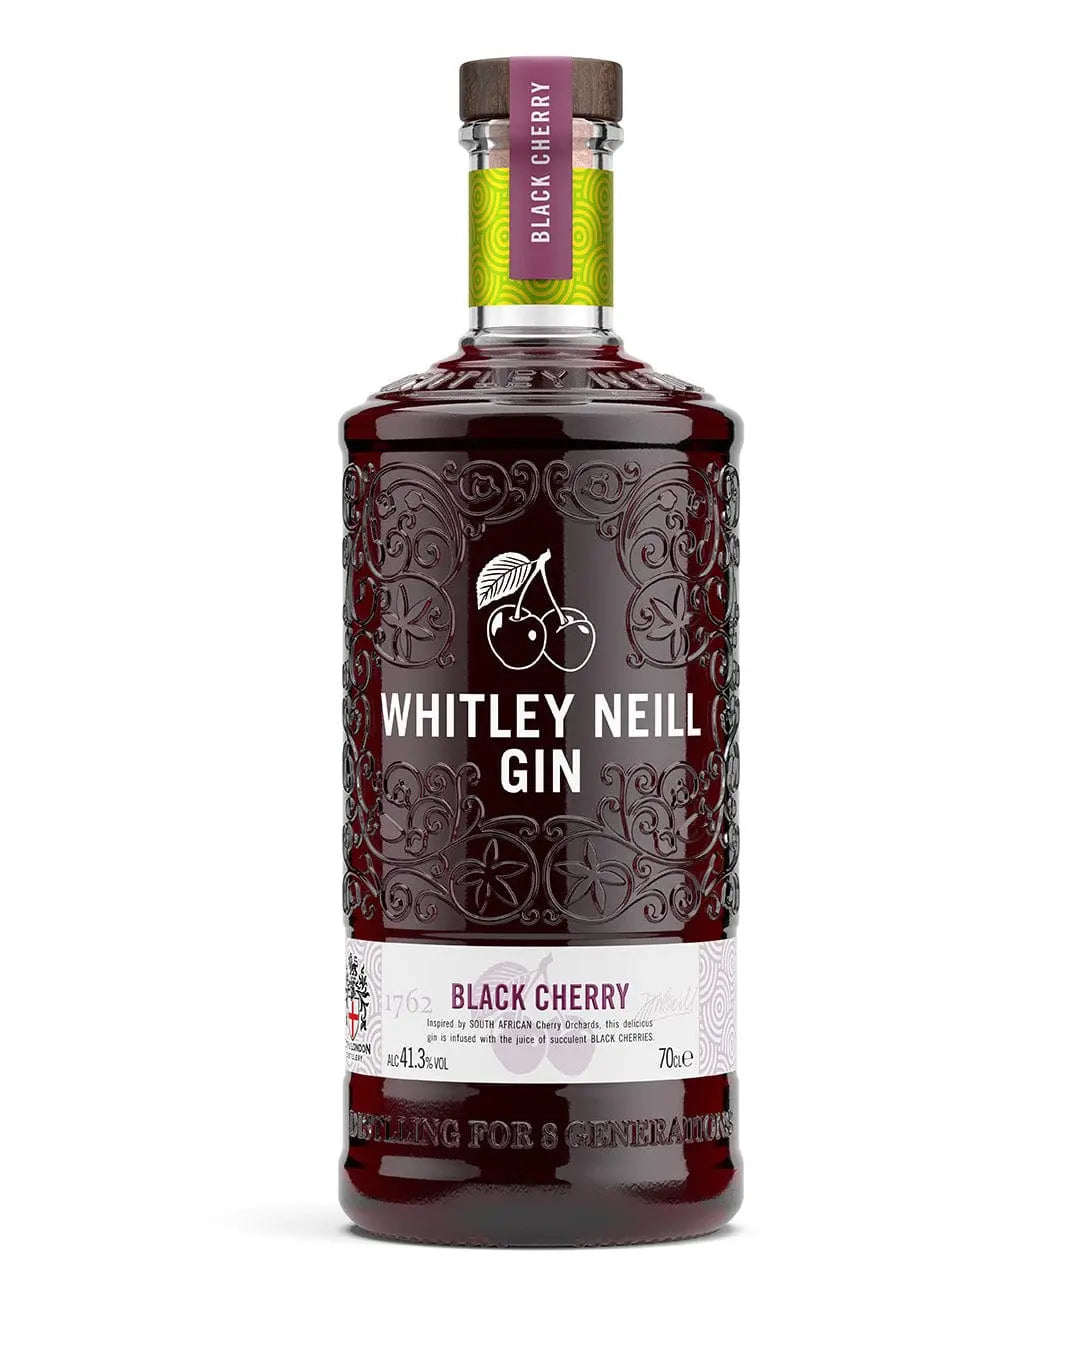 Whitley Neill Black Cherry Gin, 70 cl Gin 5011166069133